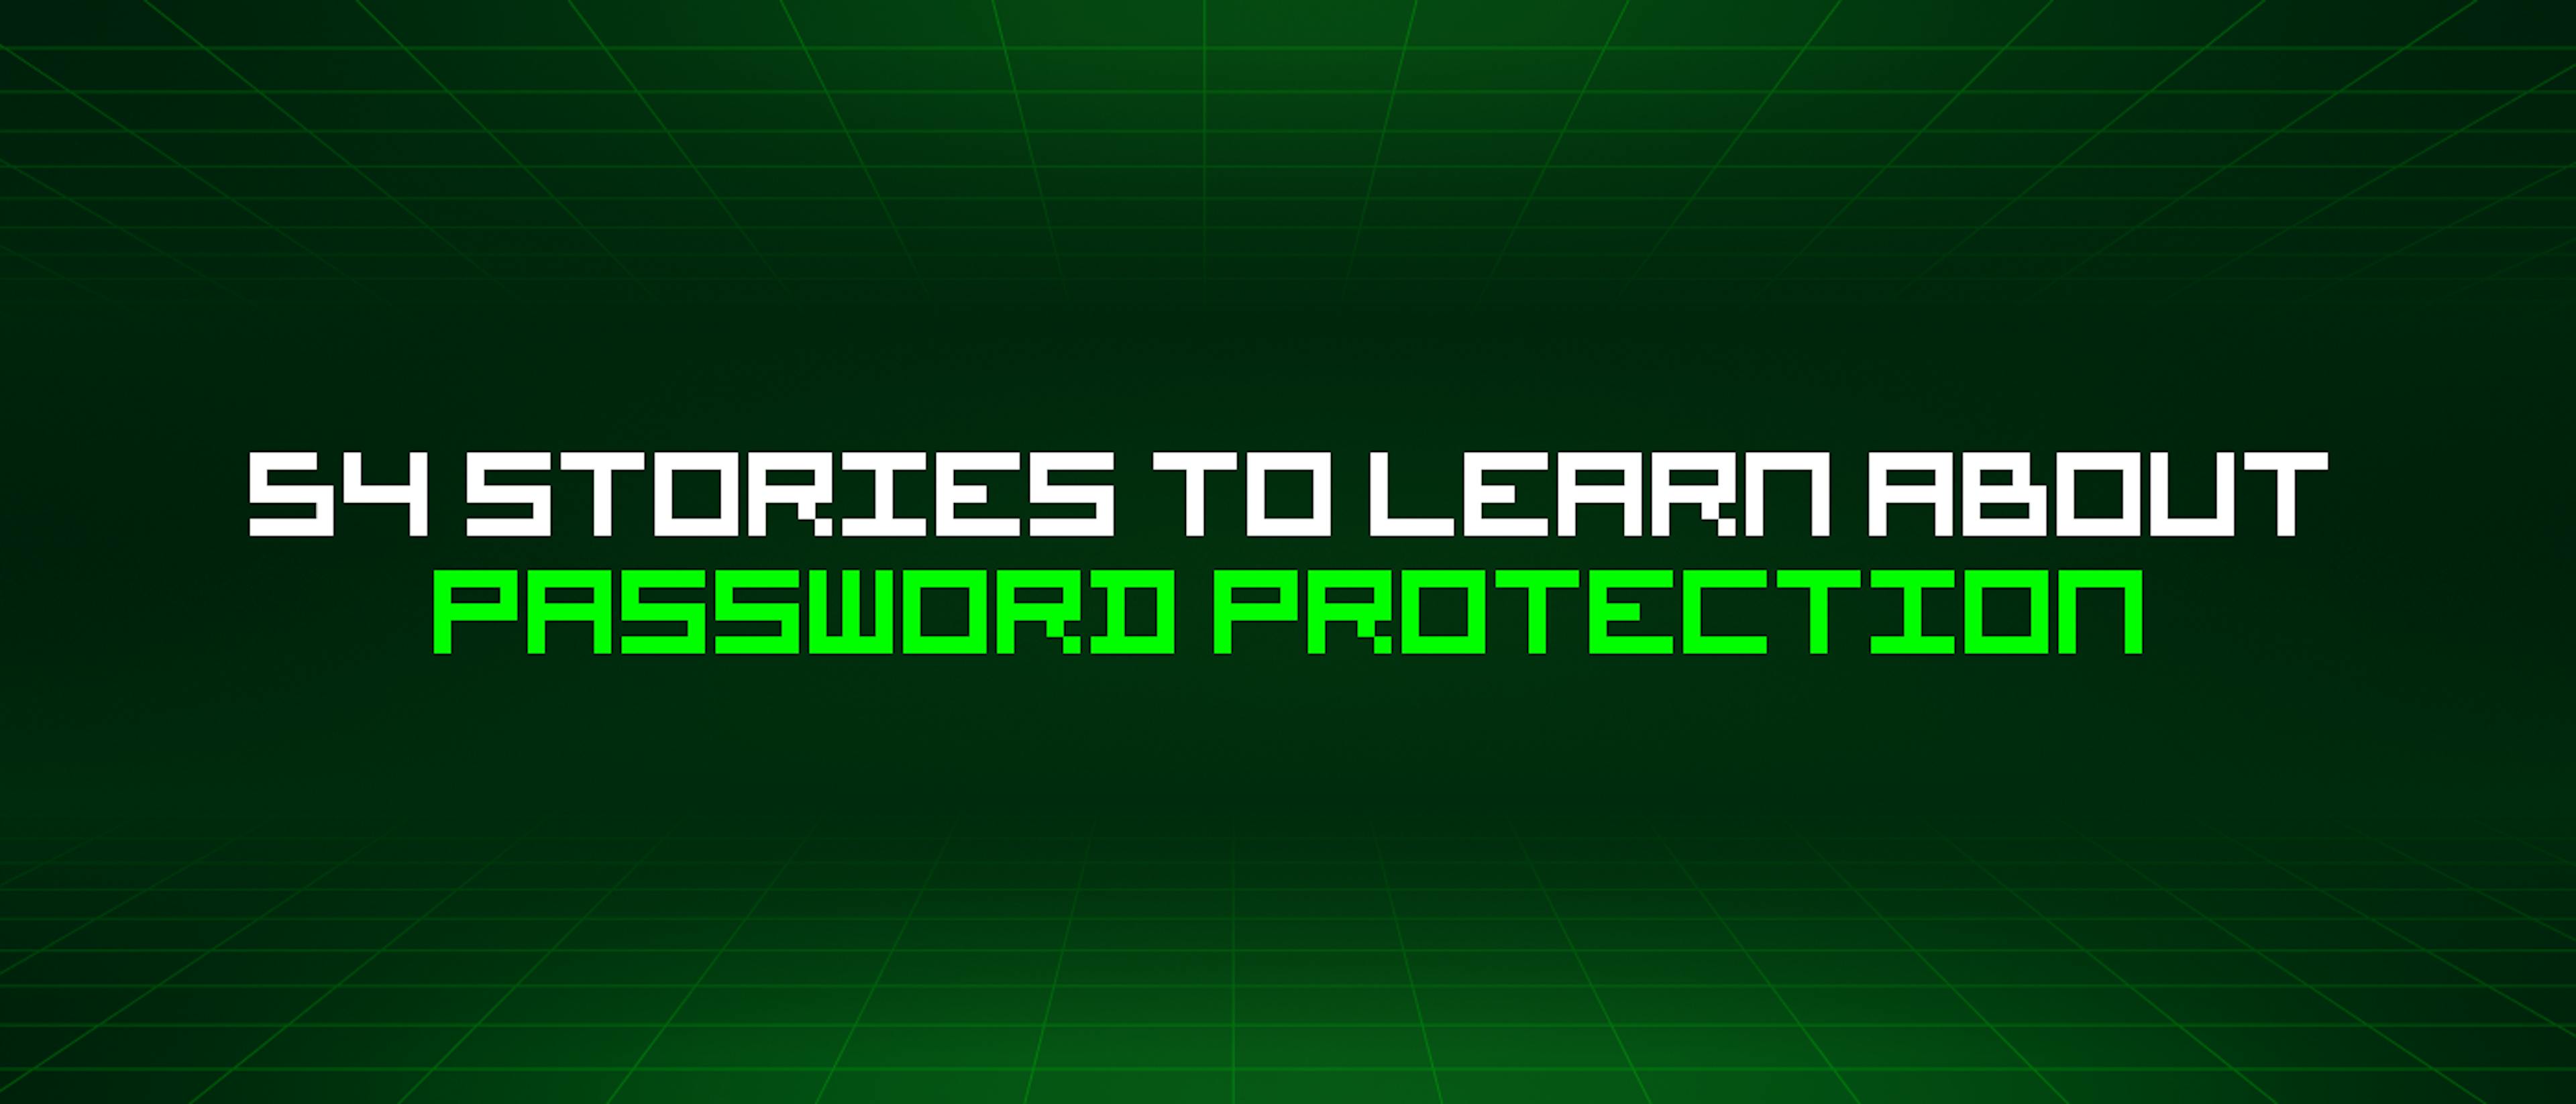 featured image - 54 Stories To Learn About Password Protection